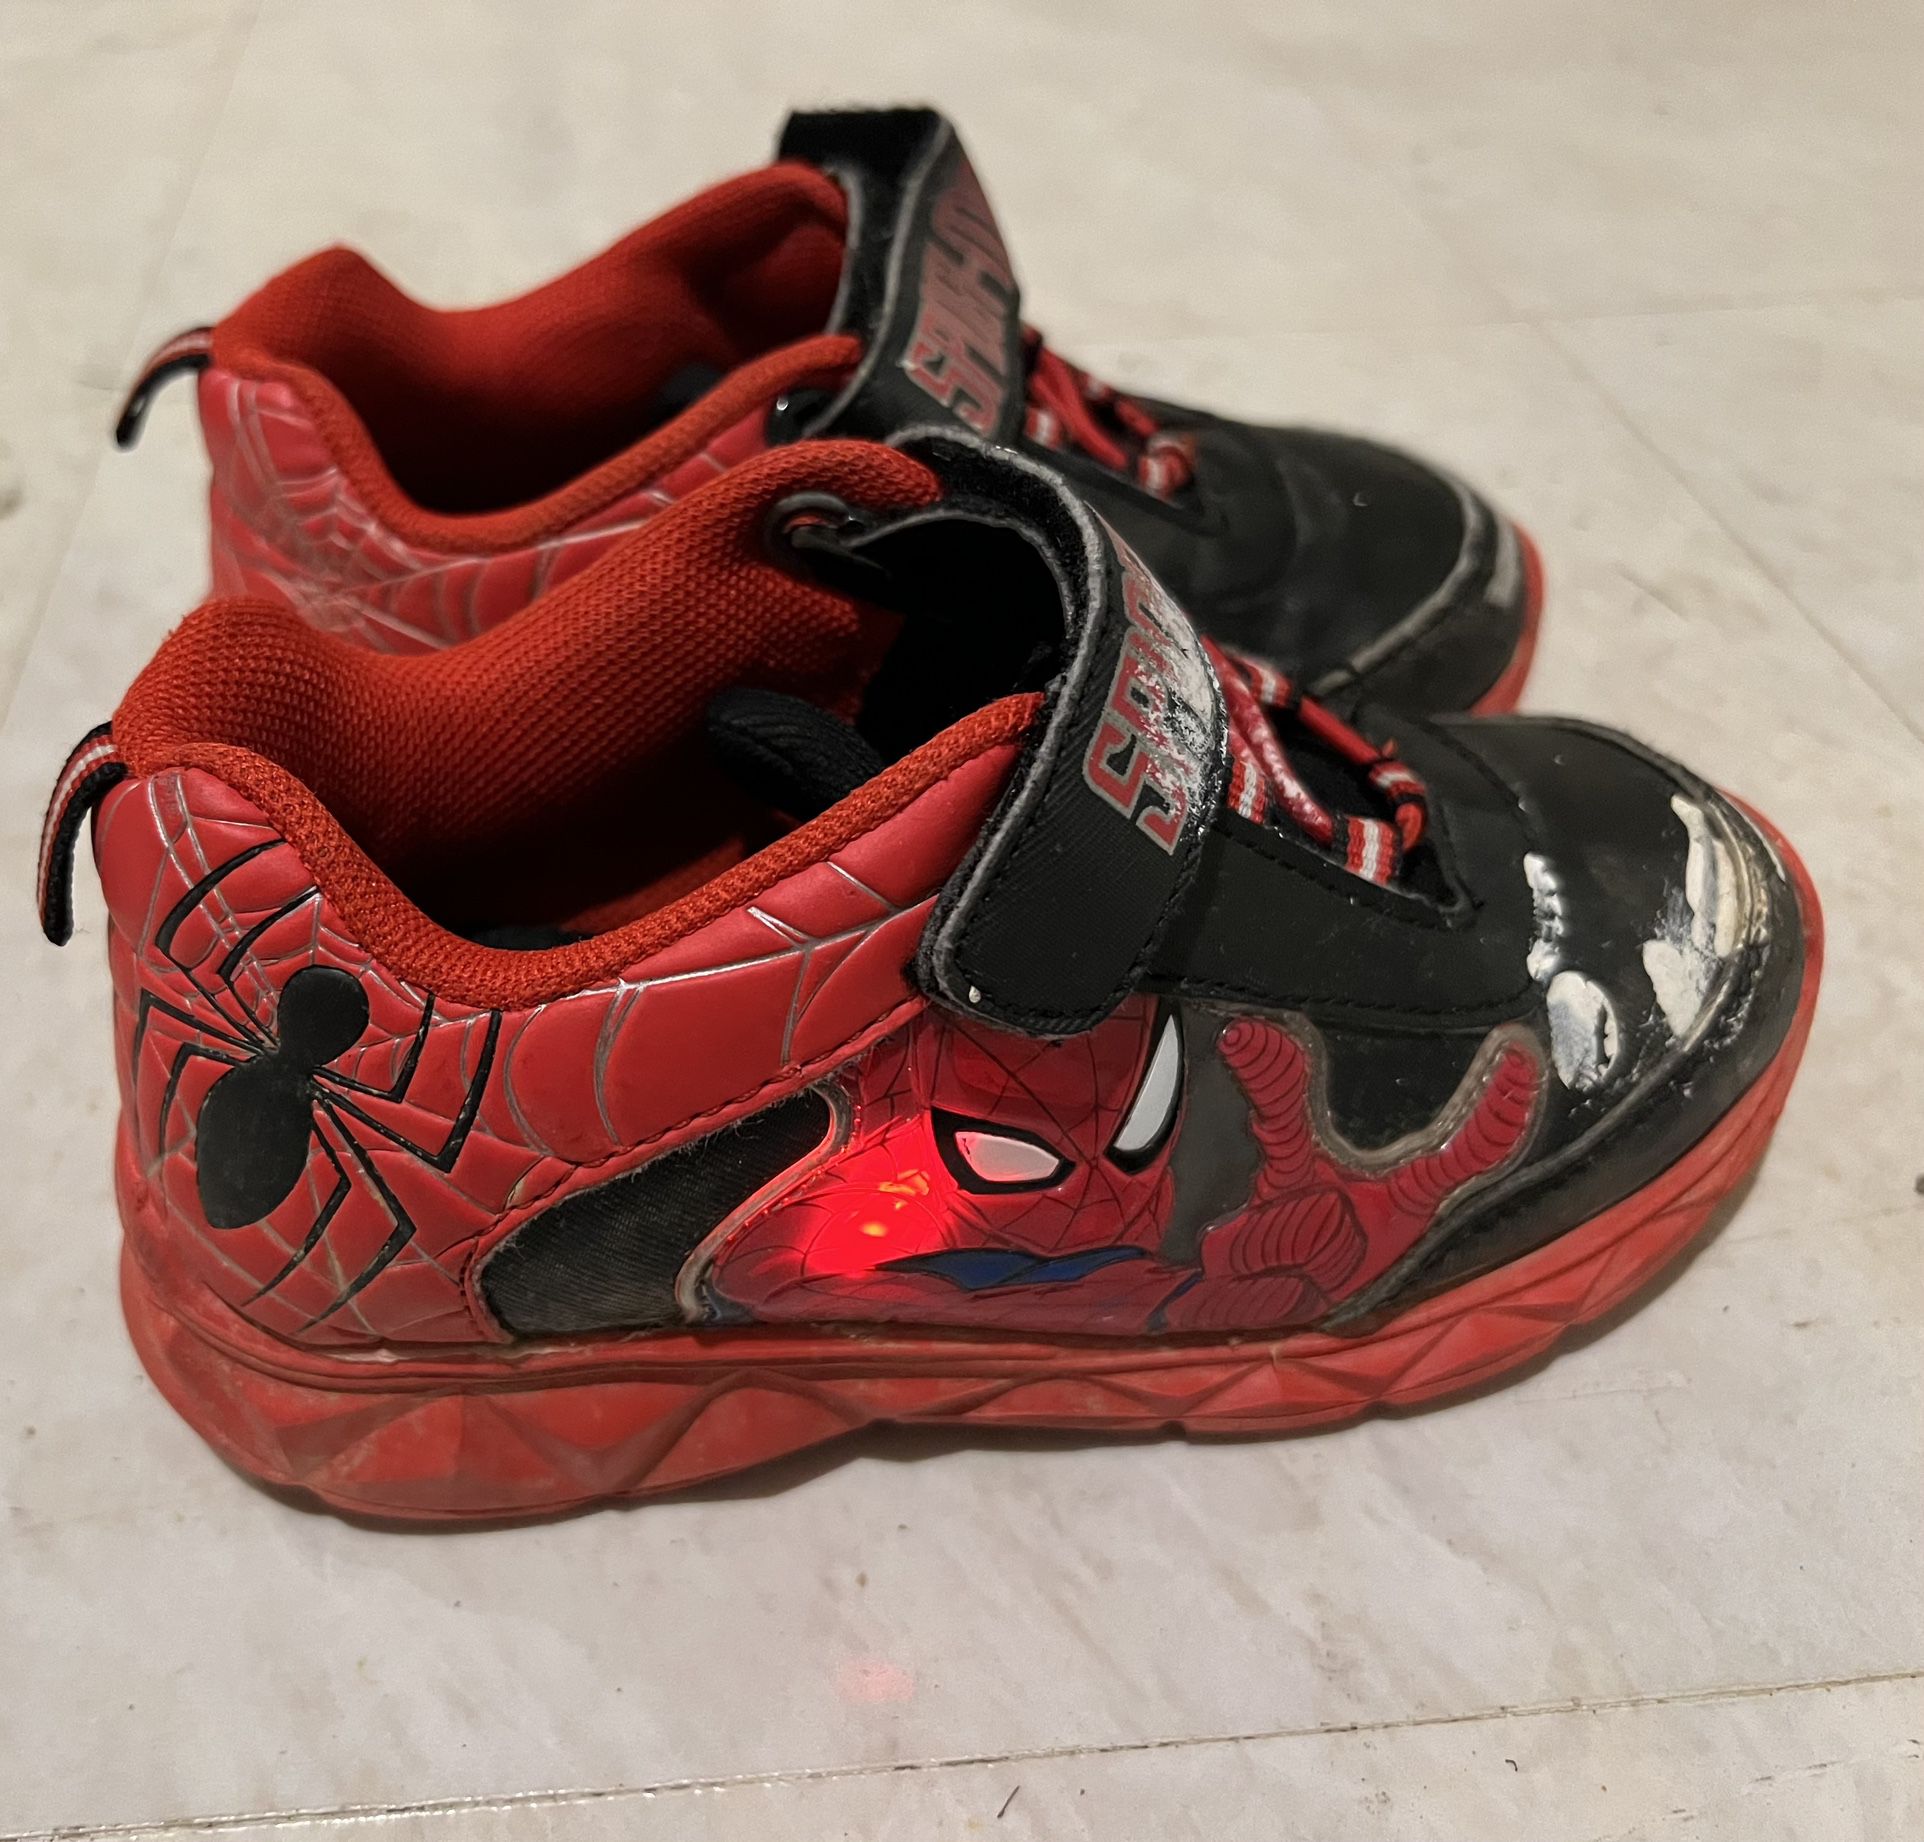 Bundle Of Boy Shoes And Boots, Size 11